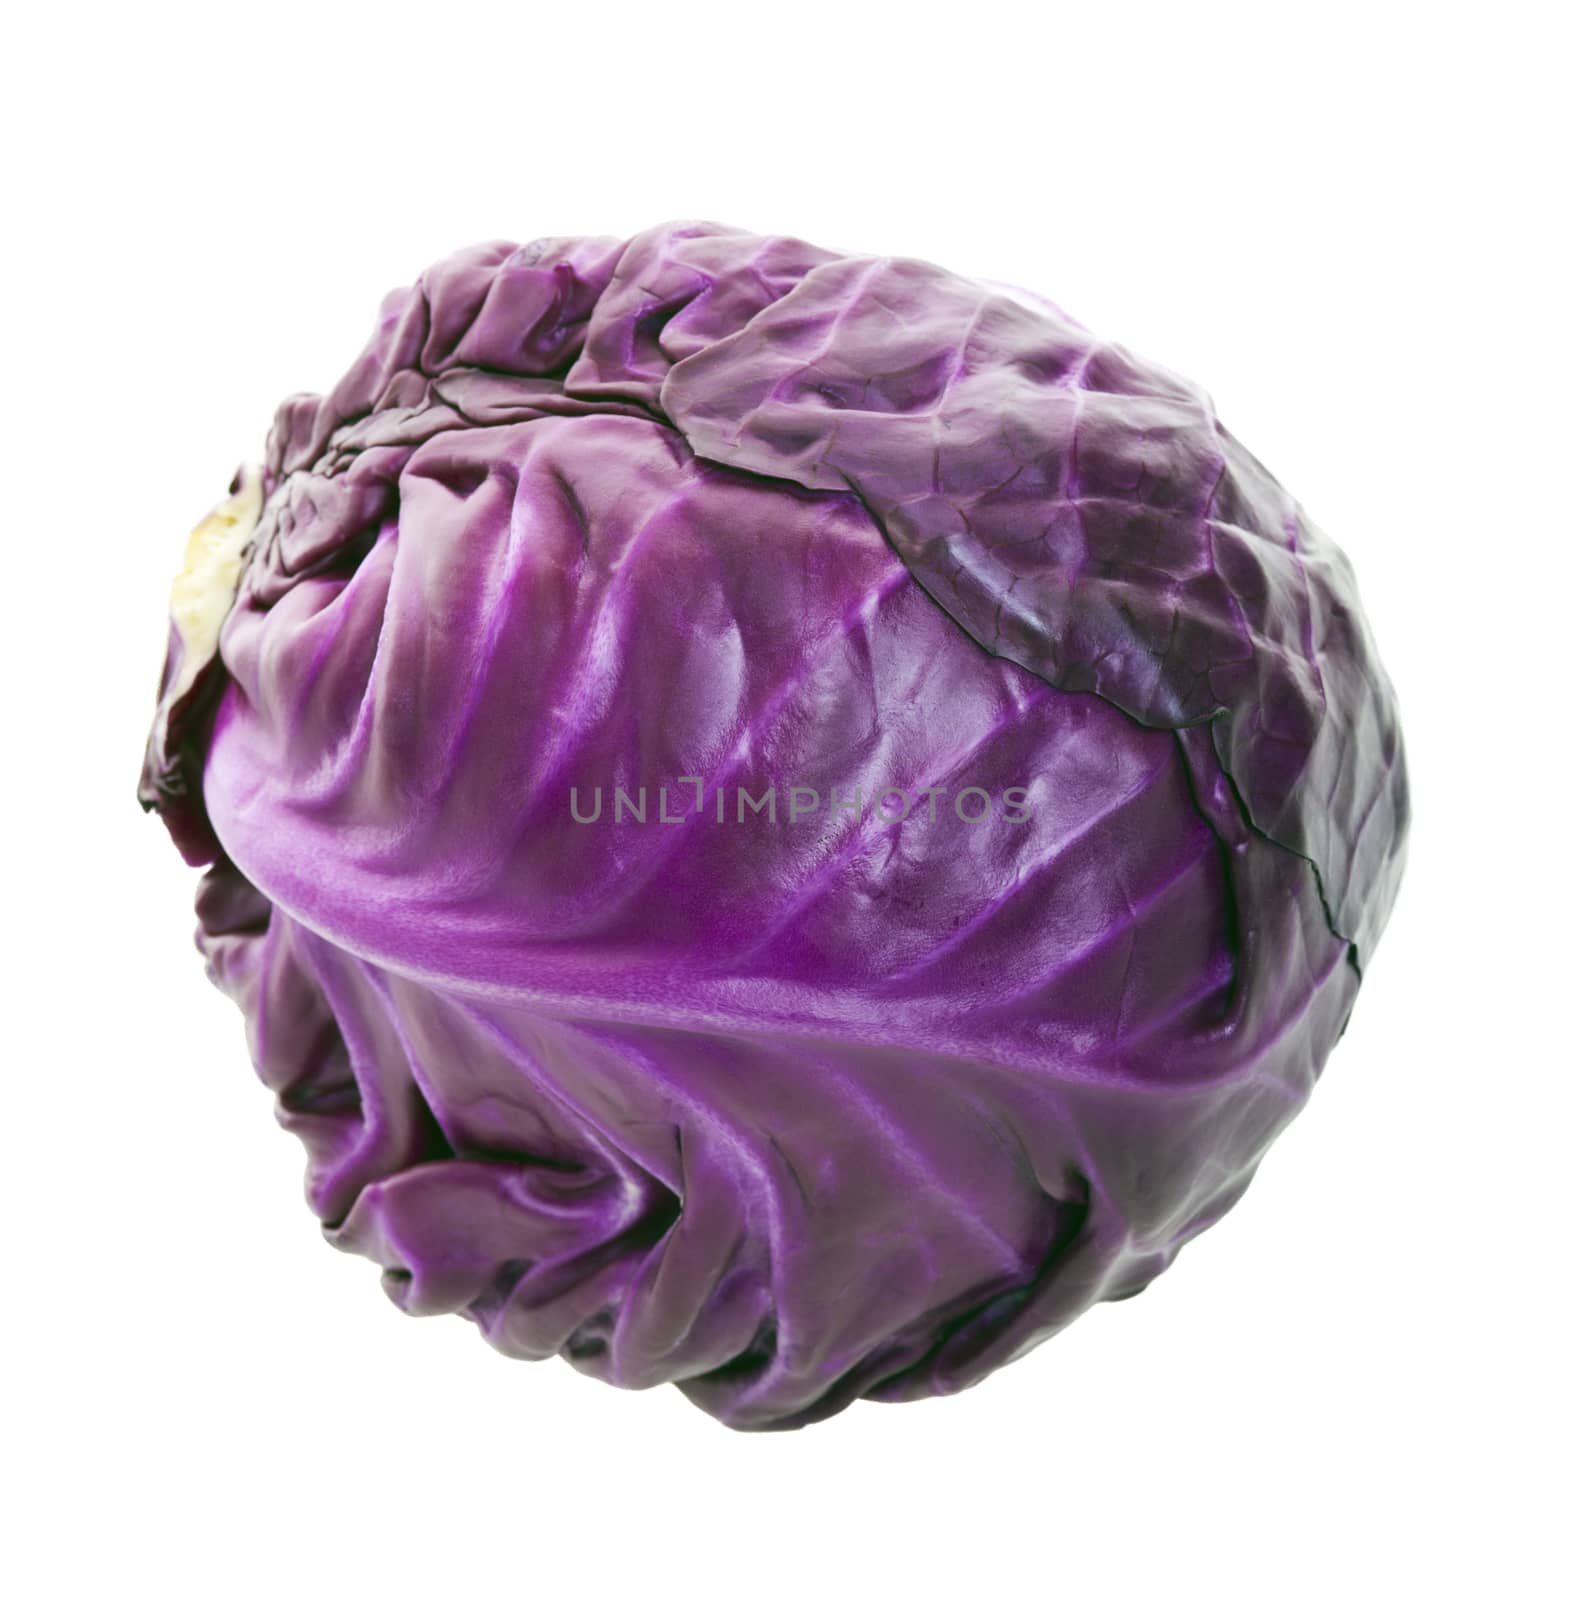 A head of purple cabbage.  Shot on white background.